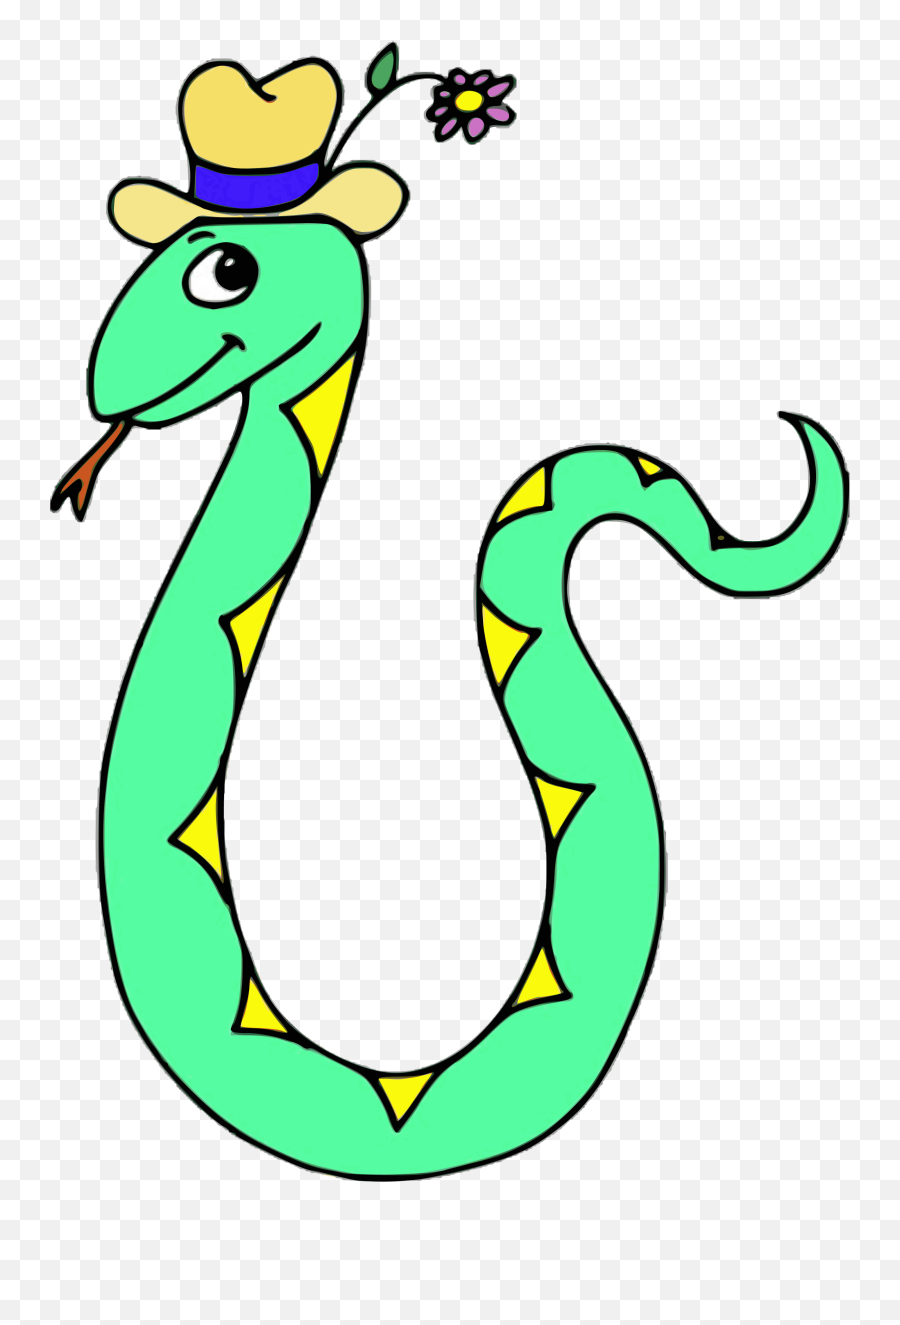 Cobra Snake Funny Drawing Free Image - Snake With Party Hat Clip Art Emoji,Funny Animals Emotions